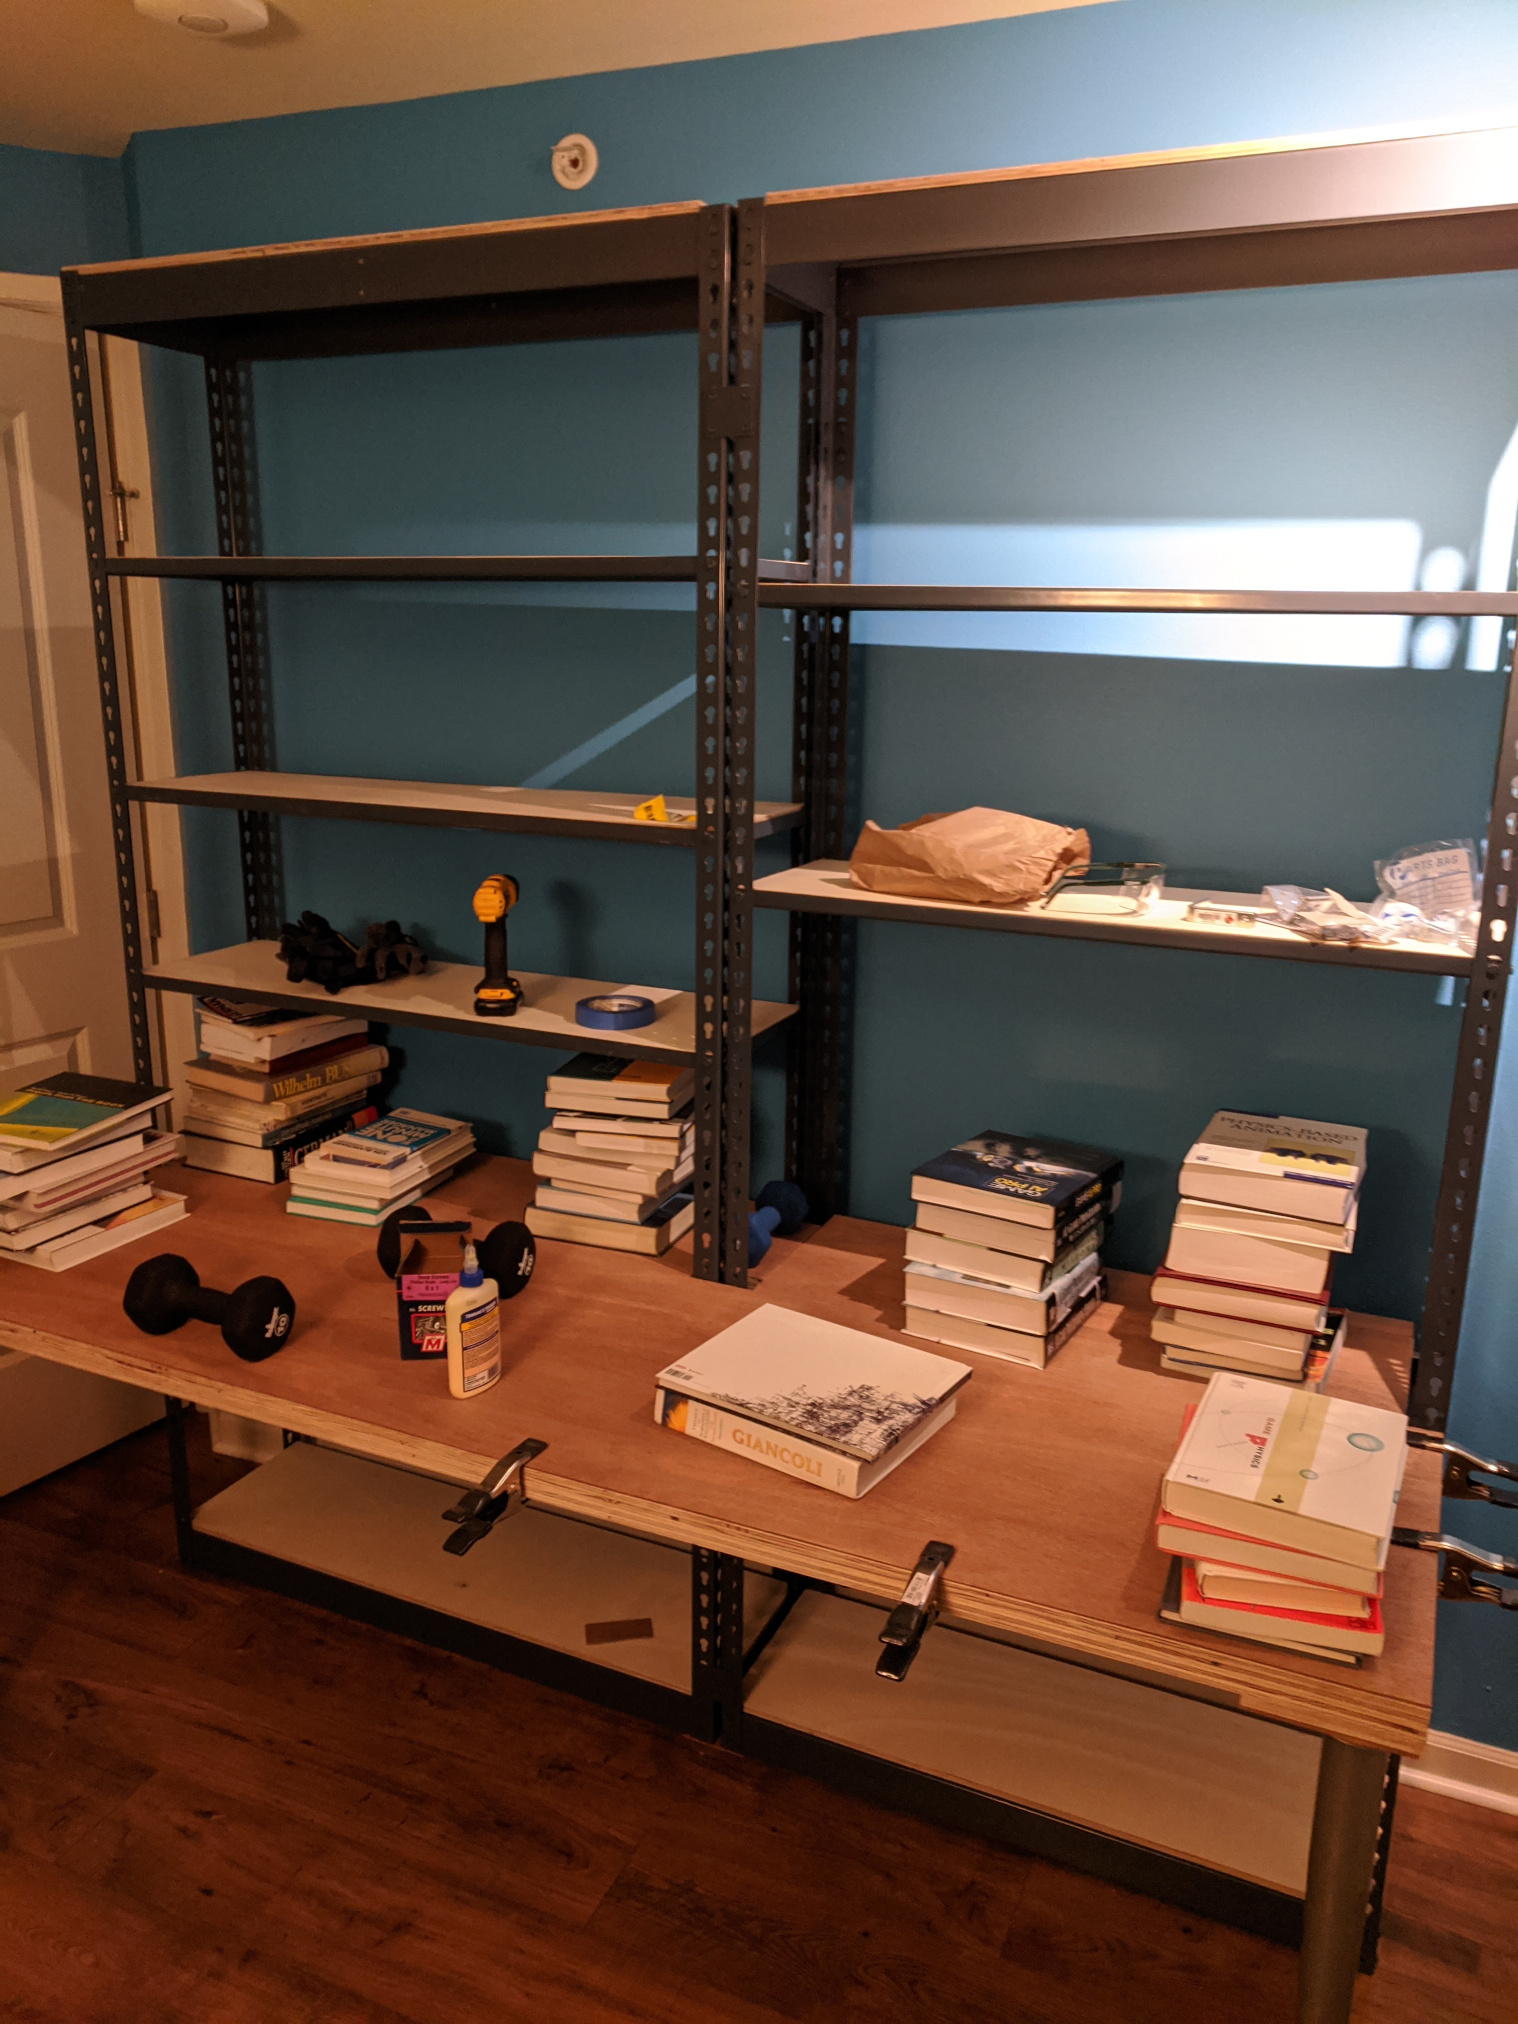 Two connected metal rivet shelving units with a desk top mounted to the front. Desk is clamped and weighted down with books.